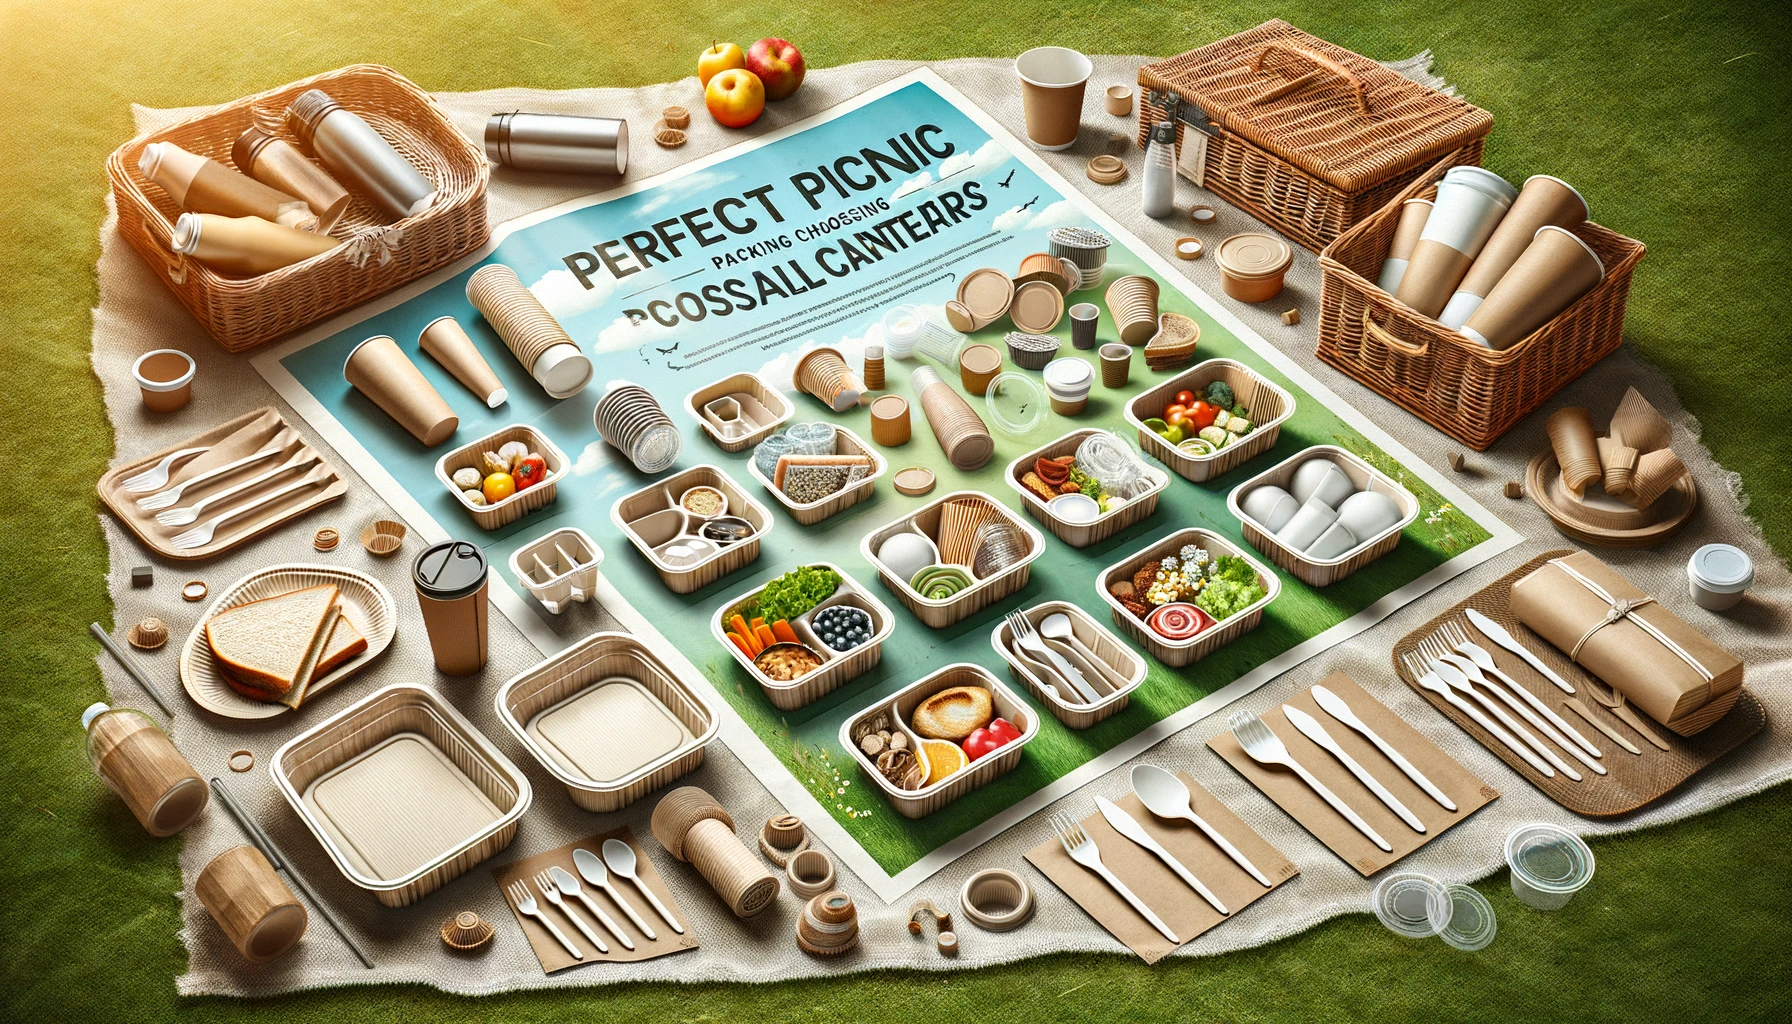 generate image on this topic The size is 1200 width and 1000 height WITH TEXTon the image Perfect Picnic Packaging: Choosing Disposable Containers